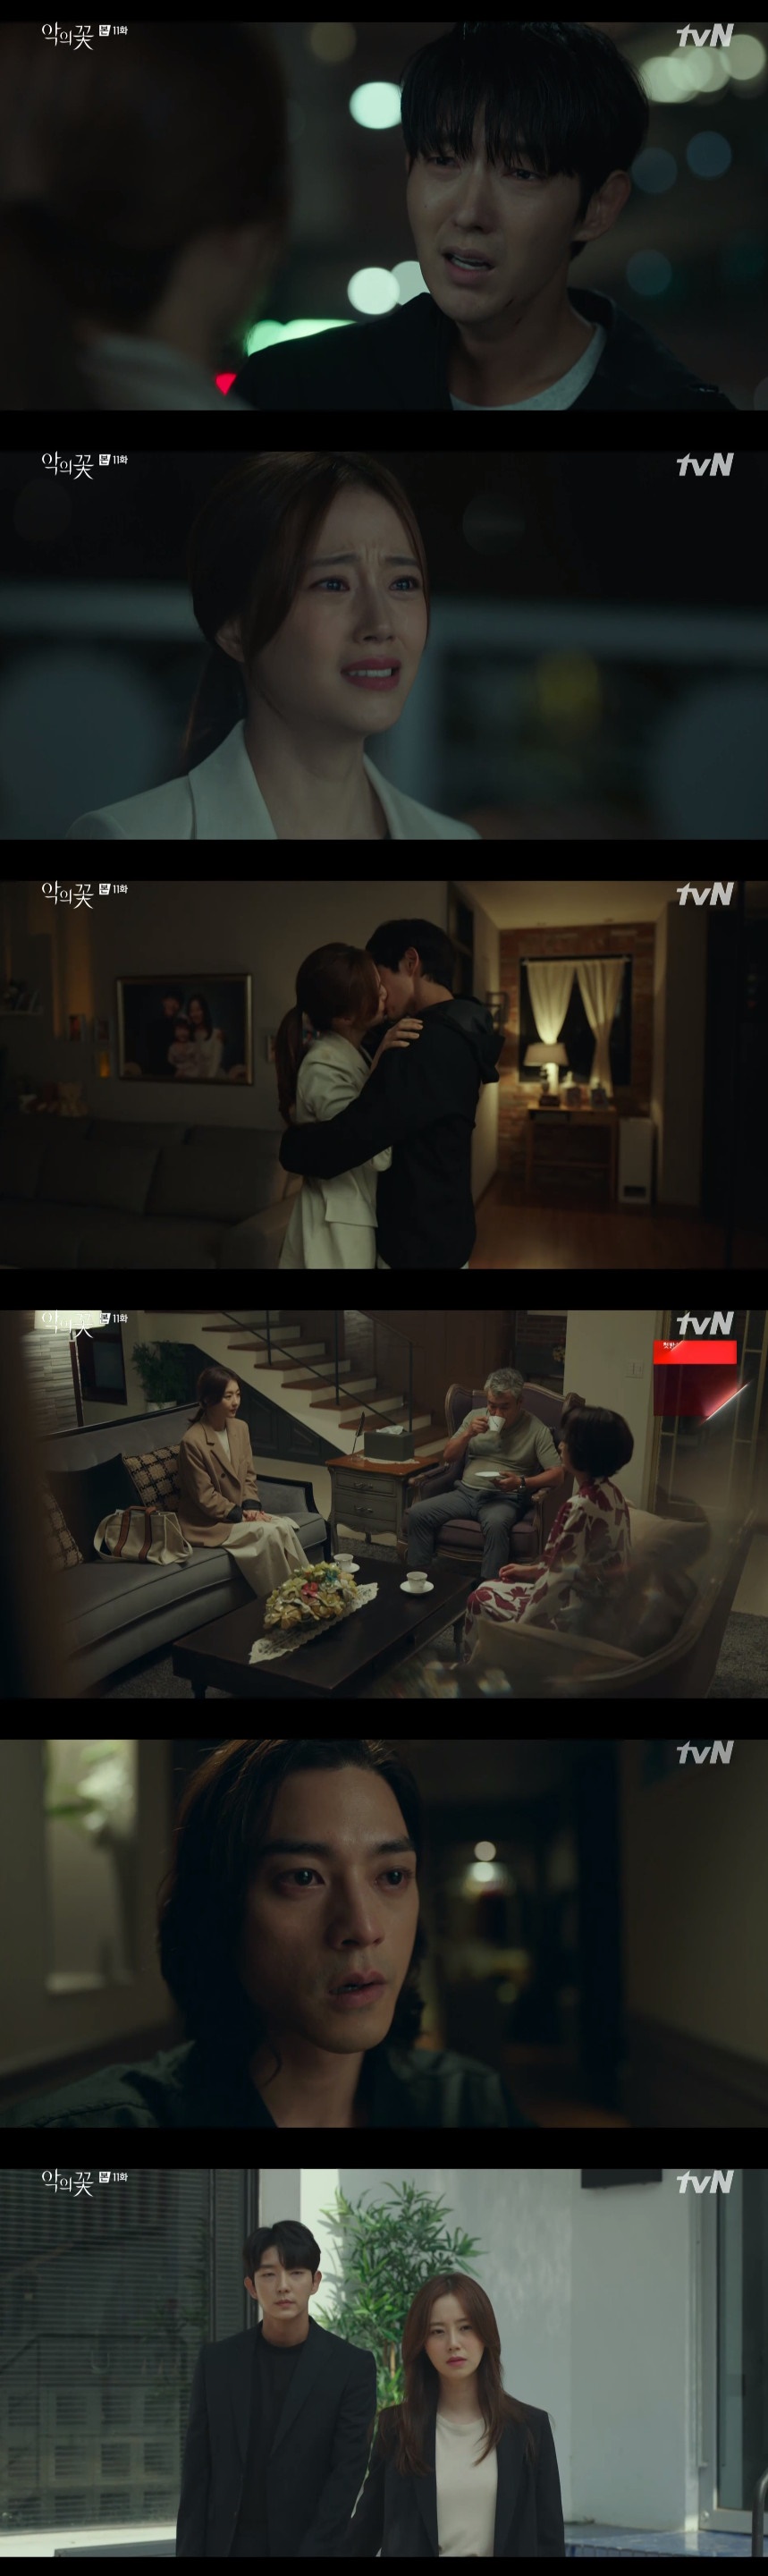 TVN drama The Flower of Evil with the creepy Reversal story Lee Joon-gi and Moon Chae-wons love of the love was swirling, imprinting the past Suspense Mellow.On that day, Do Hyun-soo (Lee Joon-gi) and Cha JiWon (Moon Chae-won) finally faced the truth that they crouched.The relationship between the two, who eventually chose to be with each other, was tainted with evil but eventually bloomed with love ().At the same time, the identity of Kim Ji-hoon, who was Mystery, was revealed as an accomplice of Do Min-seok (Choi Byung-mo), and the explosion to Suspense, along with the melodrama, was full of development without blinking.First, Cha JiWon asked his fellow Detective Choi Jae-seop (Choi Young-joon), who learned the secret of Do Hyun-soo, to I will prove my life and prove him.At that time, Do Hyun-soos plan to reveal the accomplice of the Jennifer 8 case in Yeonju City and to work with the police to the human trafficking organization was in crisis as he was caught by the organization boss, Yeom Sang-cheol (Kim Ki-moo).Just before Do Hyun-soo was tied up and lost his life, Detective Cha JiWon appeared to prevent Yeom Sang-cheol and put more sweat in his hands.The relief that she came to save Do Hyun-soo and the tension that she could not hide the fact that she knew the identity of Do Hyun-soo, the ambivalence between the drama and the drama spread at the same time.Do Hyun-soo was more confused by the appearance of Cha JiWon, who knew my identity but let go, but he struggled to avoid the police who were coming soon.Do Hyun-soo, who was running away, understood why Cha JiWon was acting hard and hurt, and his uncontrollable feelings were bouncing.In the end, Do Hyun-soo, who stood in front of Cha JiWon again, cried for the first time, saying, Im sorry.It was a moment when he felt that no one had told him, but he clearly expressed the feelings that existed in him.Do Hyun-soo asked Cha JiWon for forgiveness, who knew everything but believed, and she also cried tears without hesitation, saying, I just had to do it.The two, who knew that they could no longer return to their happy daily lives, hugged each other in silence and kissed each other sadly.In addition, Do Hyun-soo confided in my real life that I had hidden in the meantime, and I made a deep echo to Cha JiWon with a confession of I love you but with a heartfelt heart.In addition, the real Baek Hee-sung, who borrowed his identity, was revealed as an accomplice of the Jennifer 8 case in the performance, and the shock reversal story was stirred.Do Hae-soo (Jang Hee-jin) testified that his left fingernail was exceptionally short, and Baek Hee-sung, who stopped biting his fingernails, overlapped, and his eyes, which were flashing with madness and living, were so creepy that they made his hair become numb.In the morning of the incident, Do Hyun-soo and Cha JiWon stood in front of Detective Choi Jae-seop, who came to arrest Do Hyun-soo with their hands tightly held.Now, the two people who have faced a sick love are wondering whether they will meet again and how Baek Hee-sung will move in the narrowing track.TVN tree drama Flower of Evil will be broadcast on Thursday, March 3 at 10:50 pm on special broadcasts, and 12 times will be broadcast at 10:50 pm on Wednesday, 9th.=